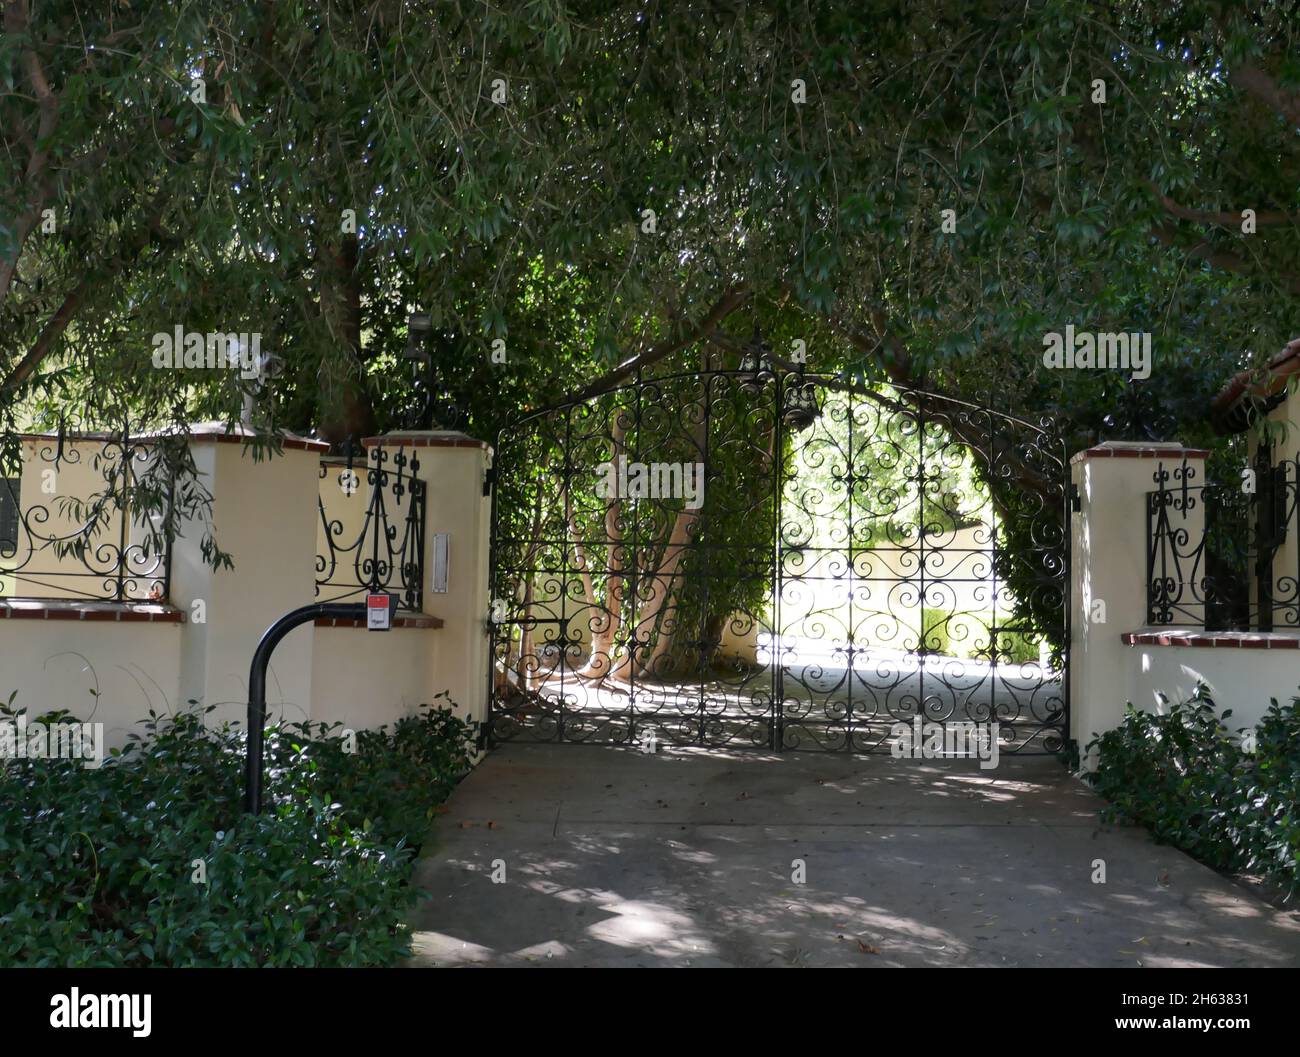 Beverly Hills, California, USA 14th September 2021 A general view of atmosphere of Actress Diane Keaton, Singer Madonna, Actress Betty Grable, Bandleader Harry James, Actor Frank Price and Architect Wallace Neff's Former home/house at 1015 N. Roxbury Drive on September 14, 2021 in Beverly Hills, California, USA. Photo by Barry King/Alamy Stock Photo Stock Photo